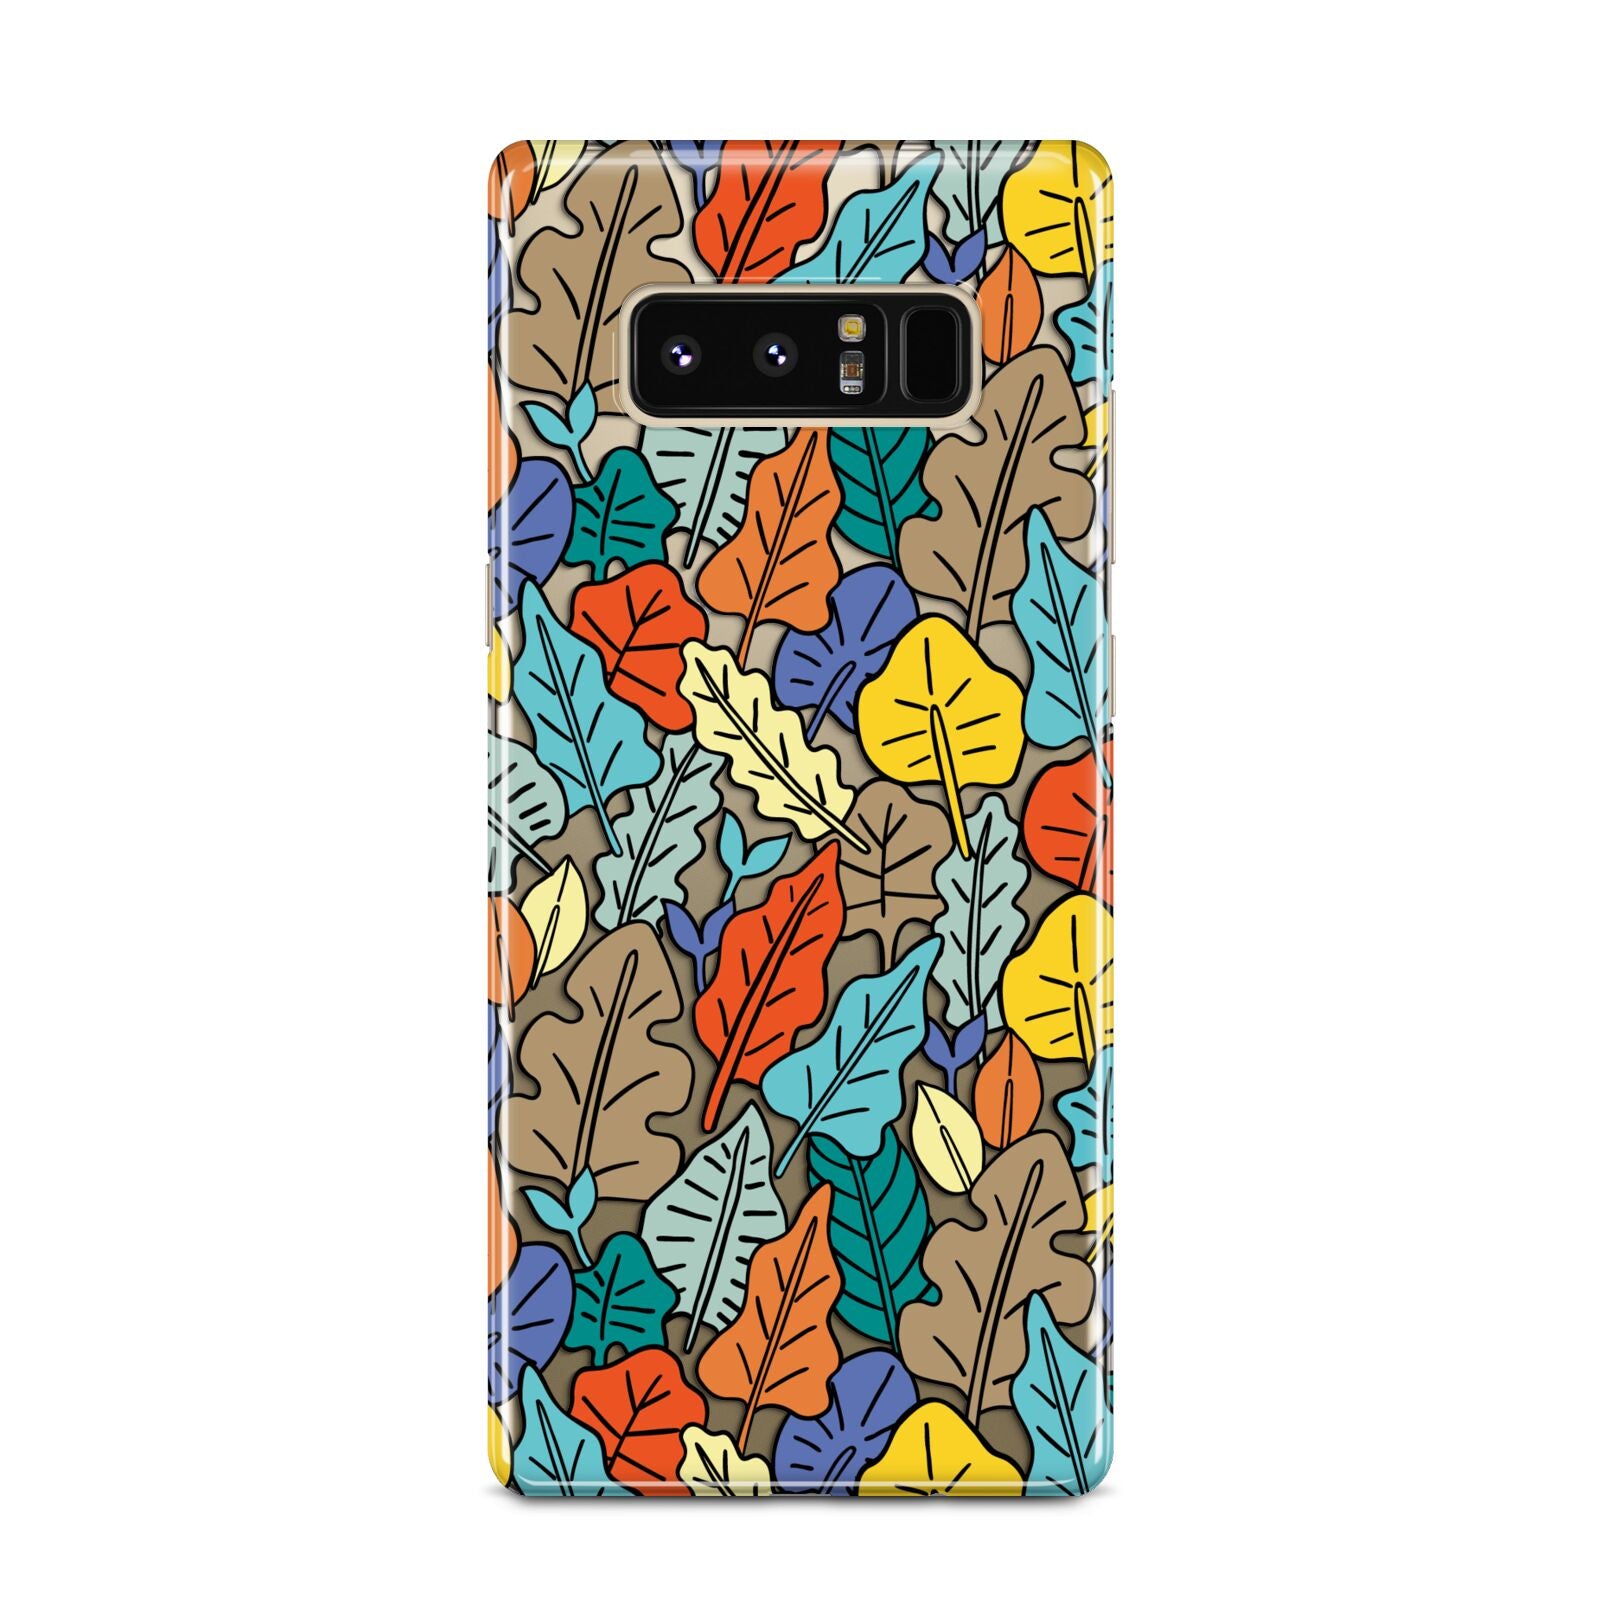 Autumn Leaves Samsung Galaxy Note 8 Case